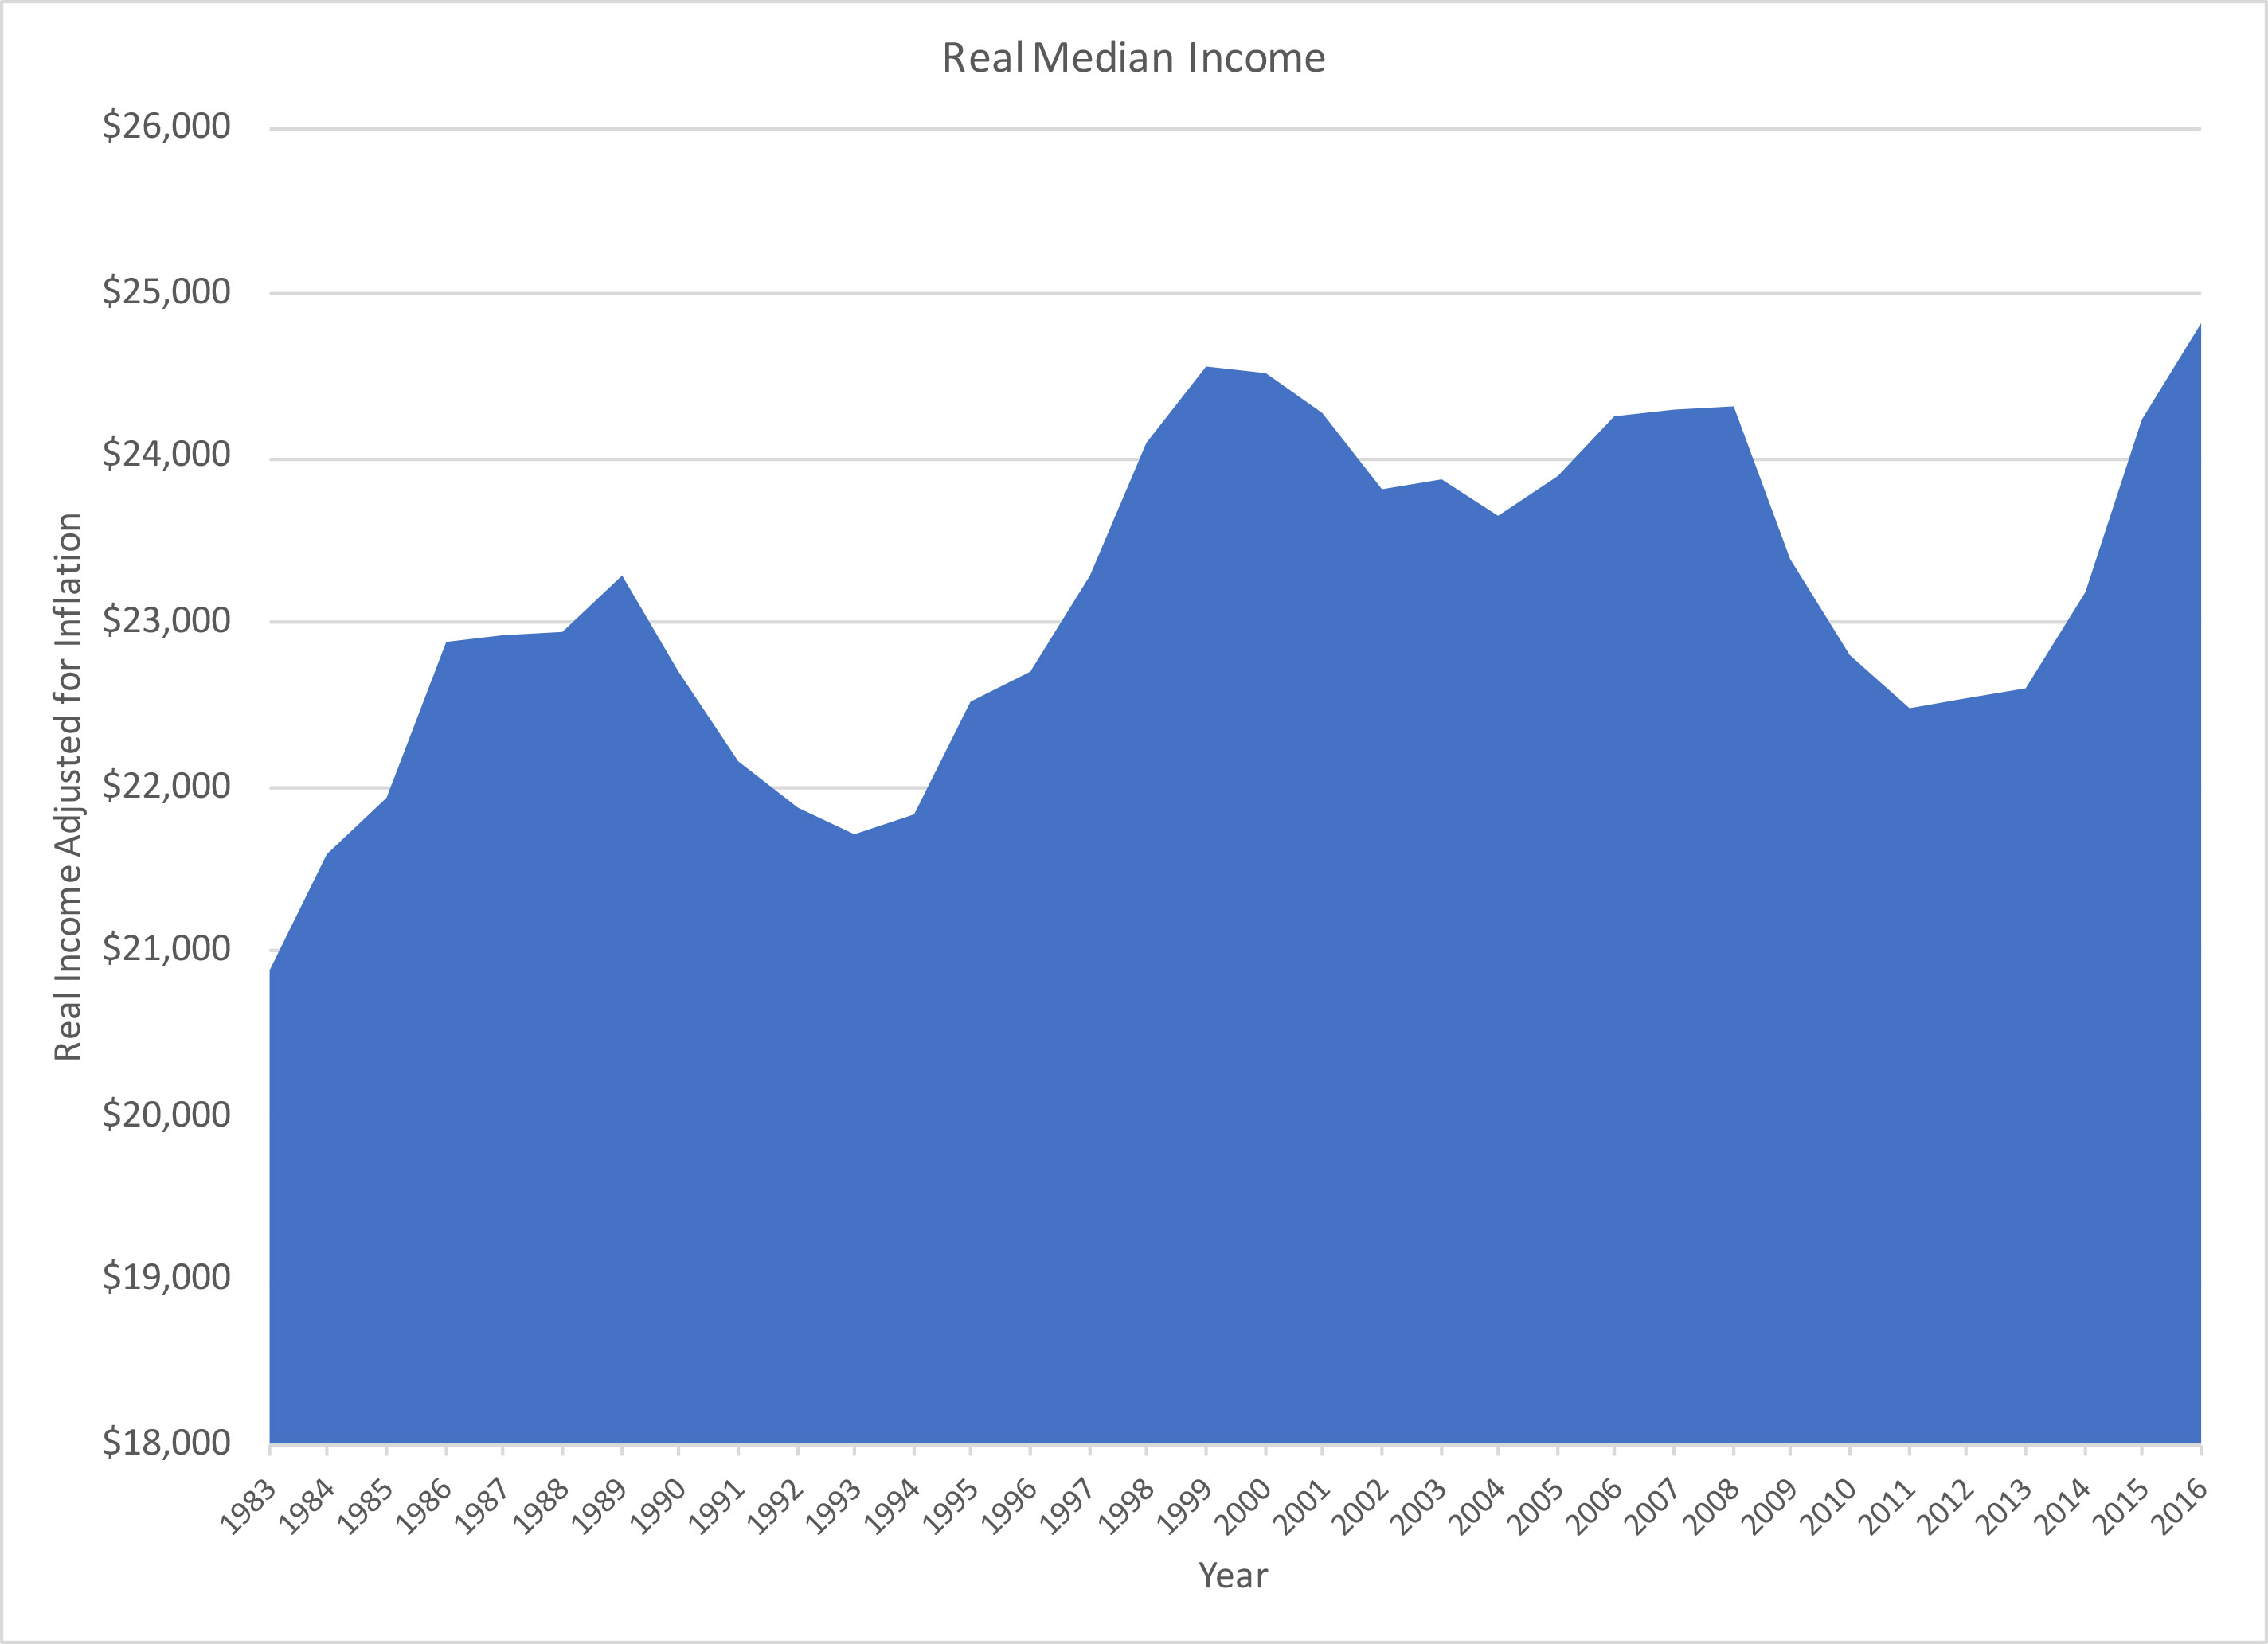 Inflation and Median Income